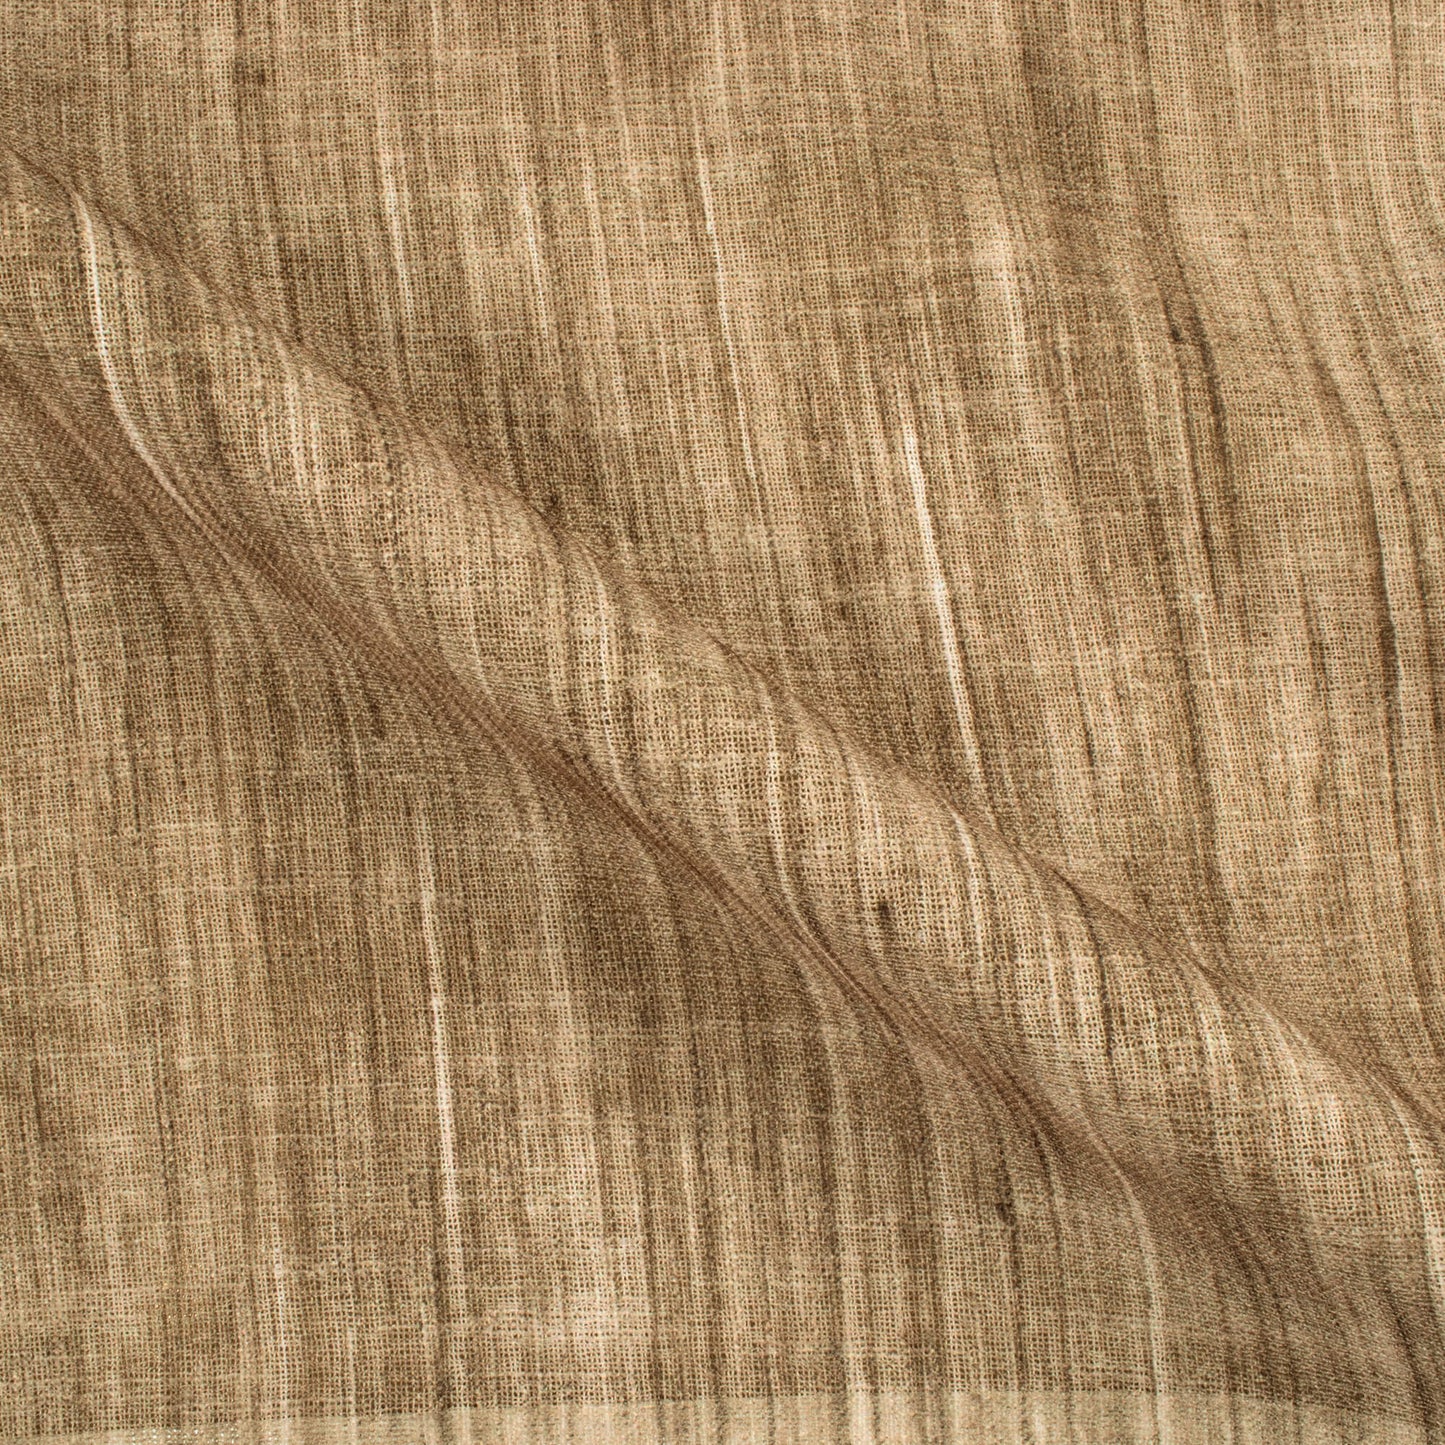 Tawny Brown Textured Premium Sheer Fabric (Width 54 Inches)